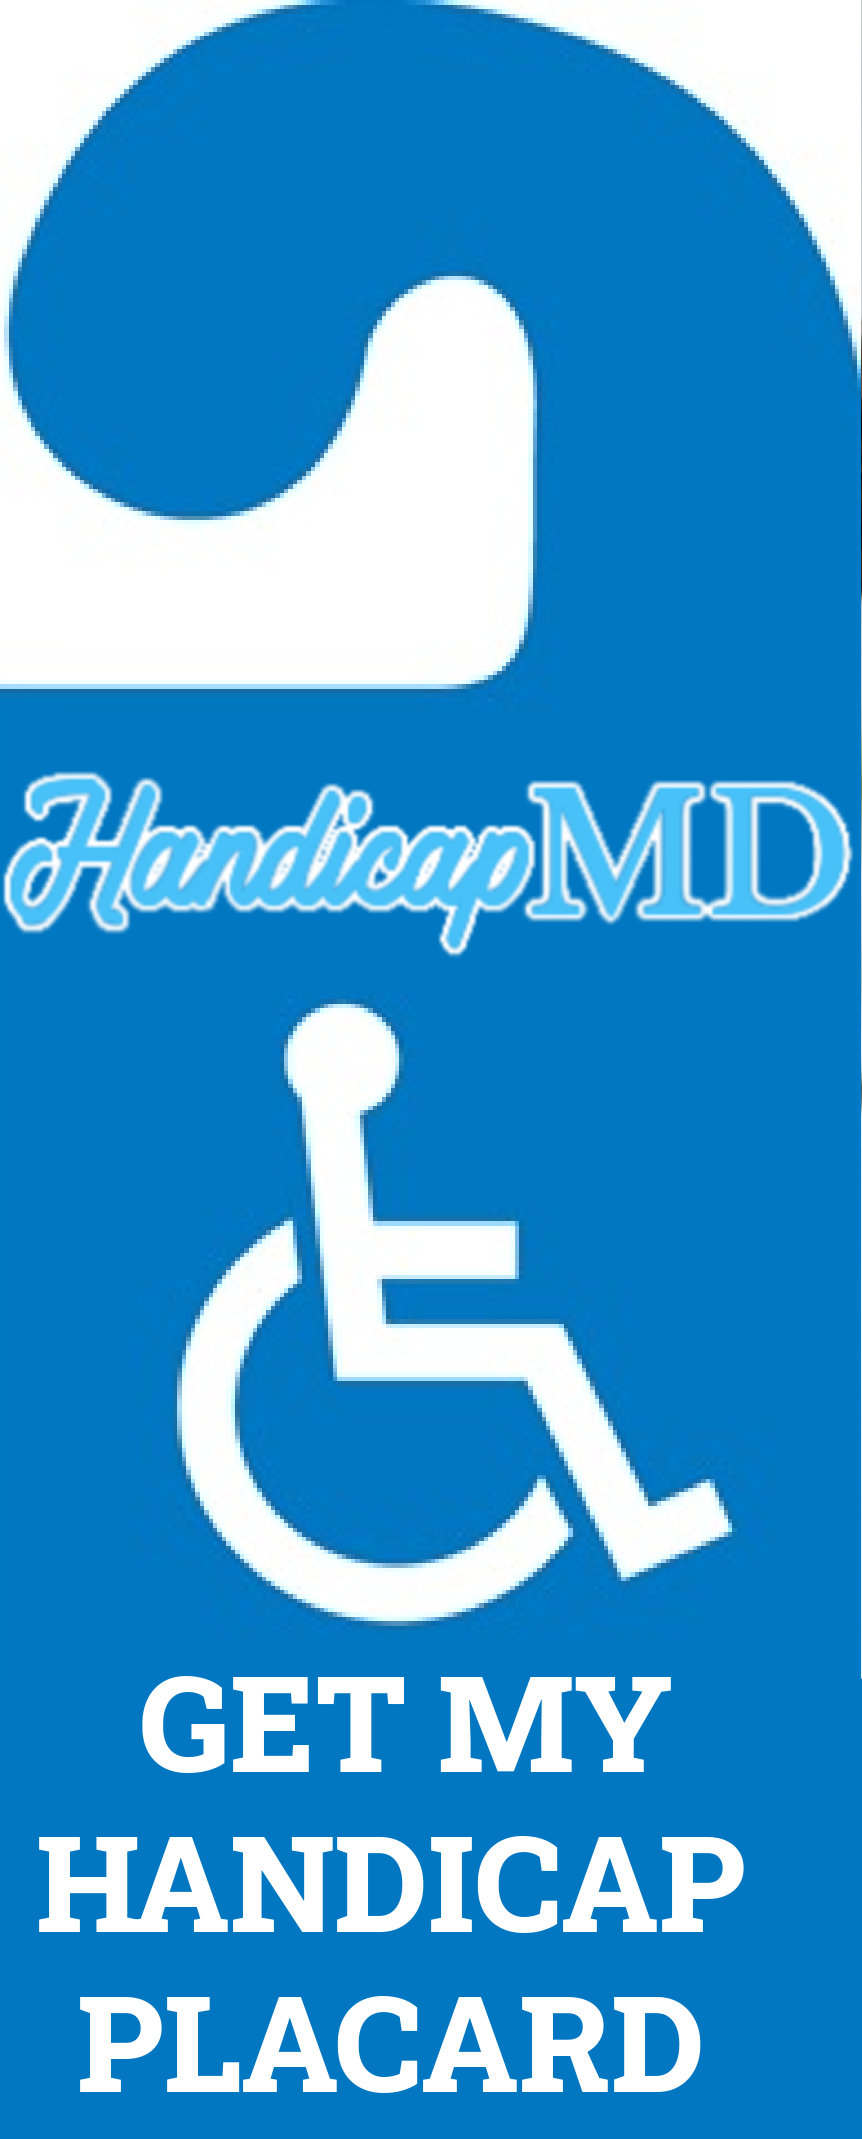 Tips for Making the Most of Your Handicap Placard in Newark NJ